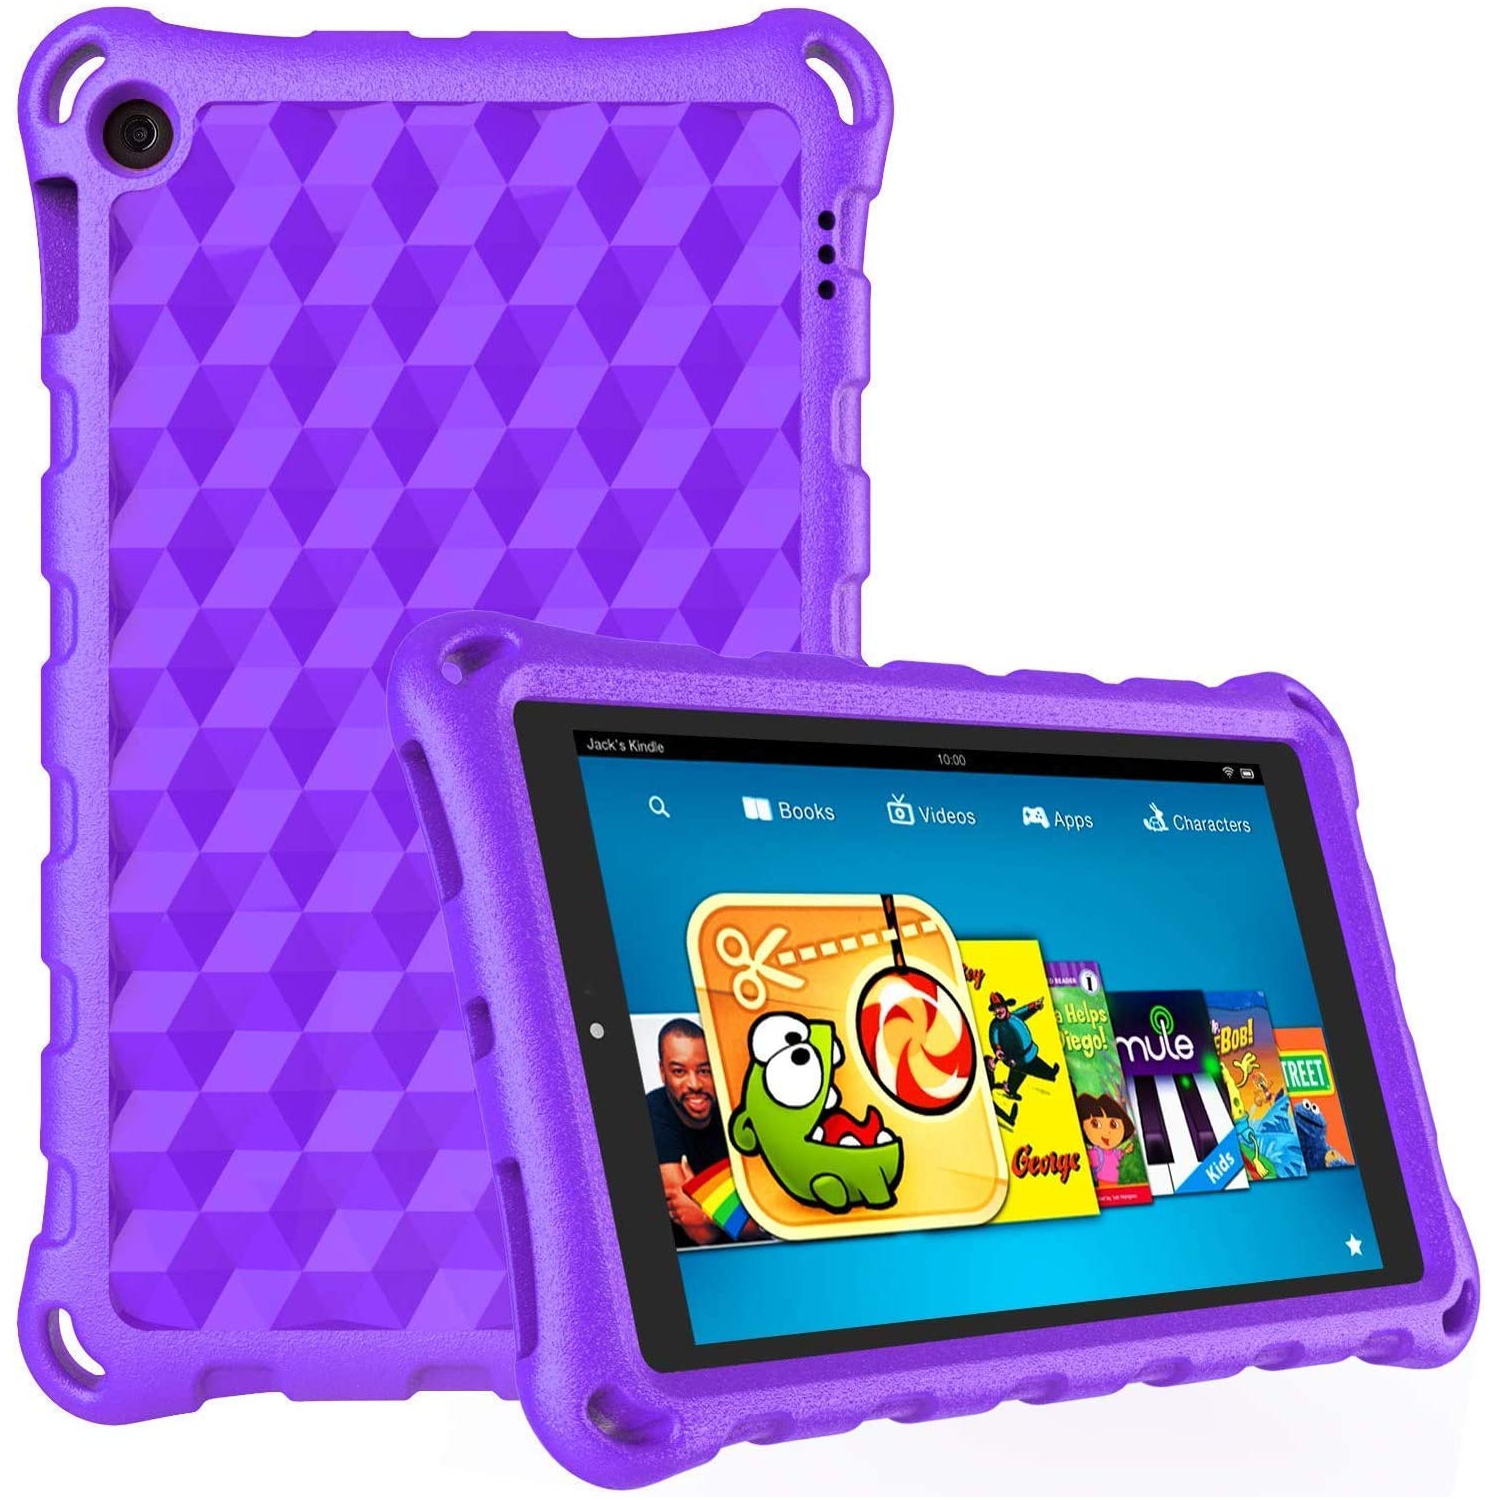 Fire 7 2019 Case,Fire 7 2019 Case for Kids, Grand Sky-G Super Light Weight Shockproof Kids Case for Amazon Fire 7 Tablet (5th/7th/9th Generation, 2015/2017/2019 Released)(Grape Pur